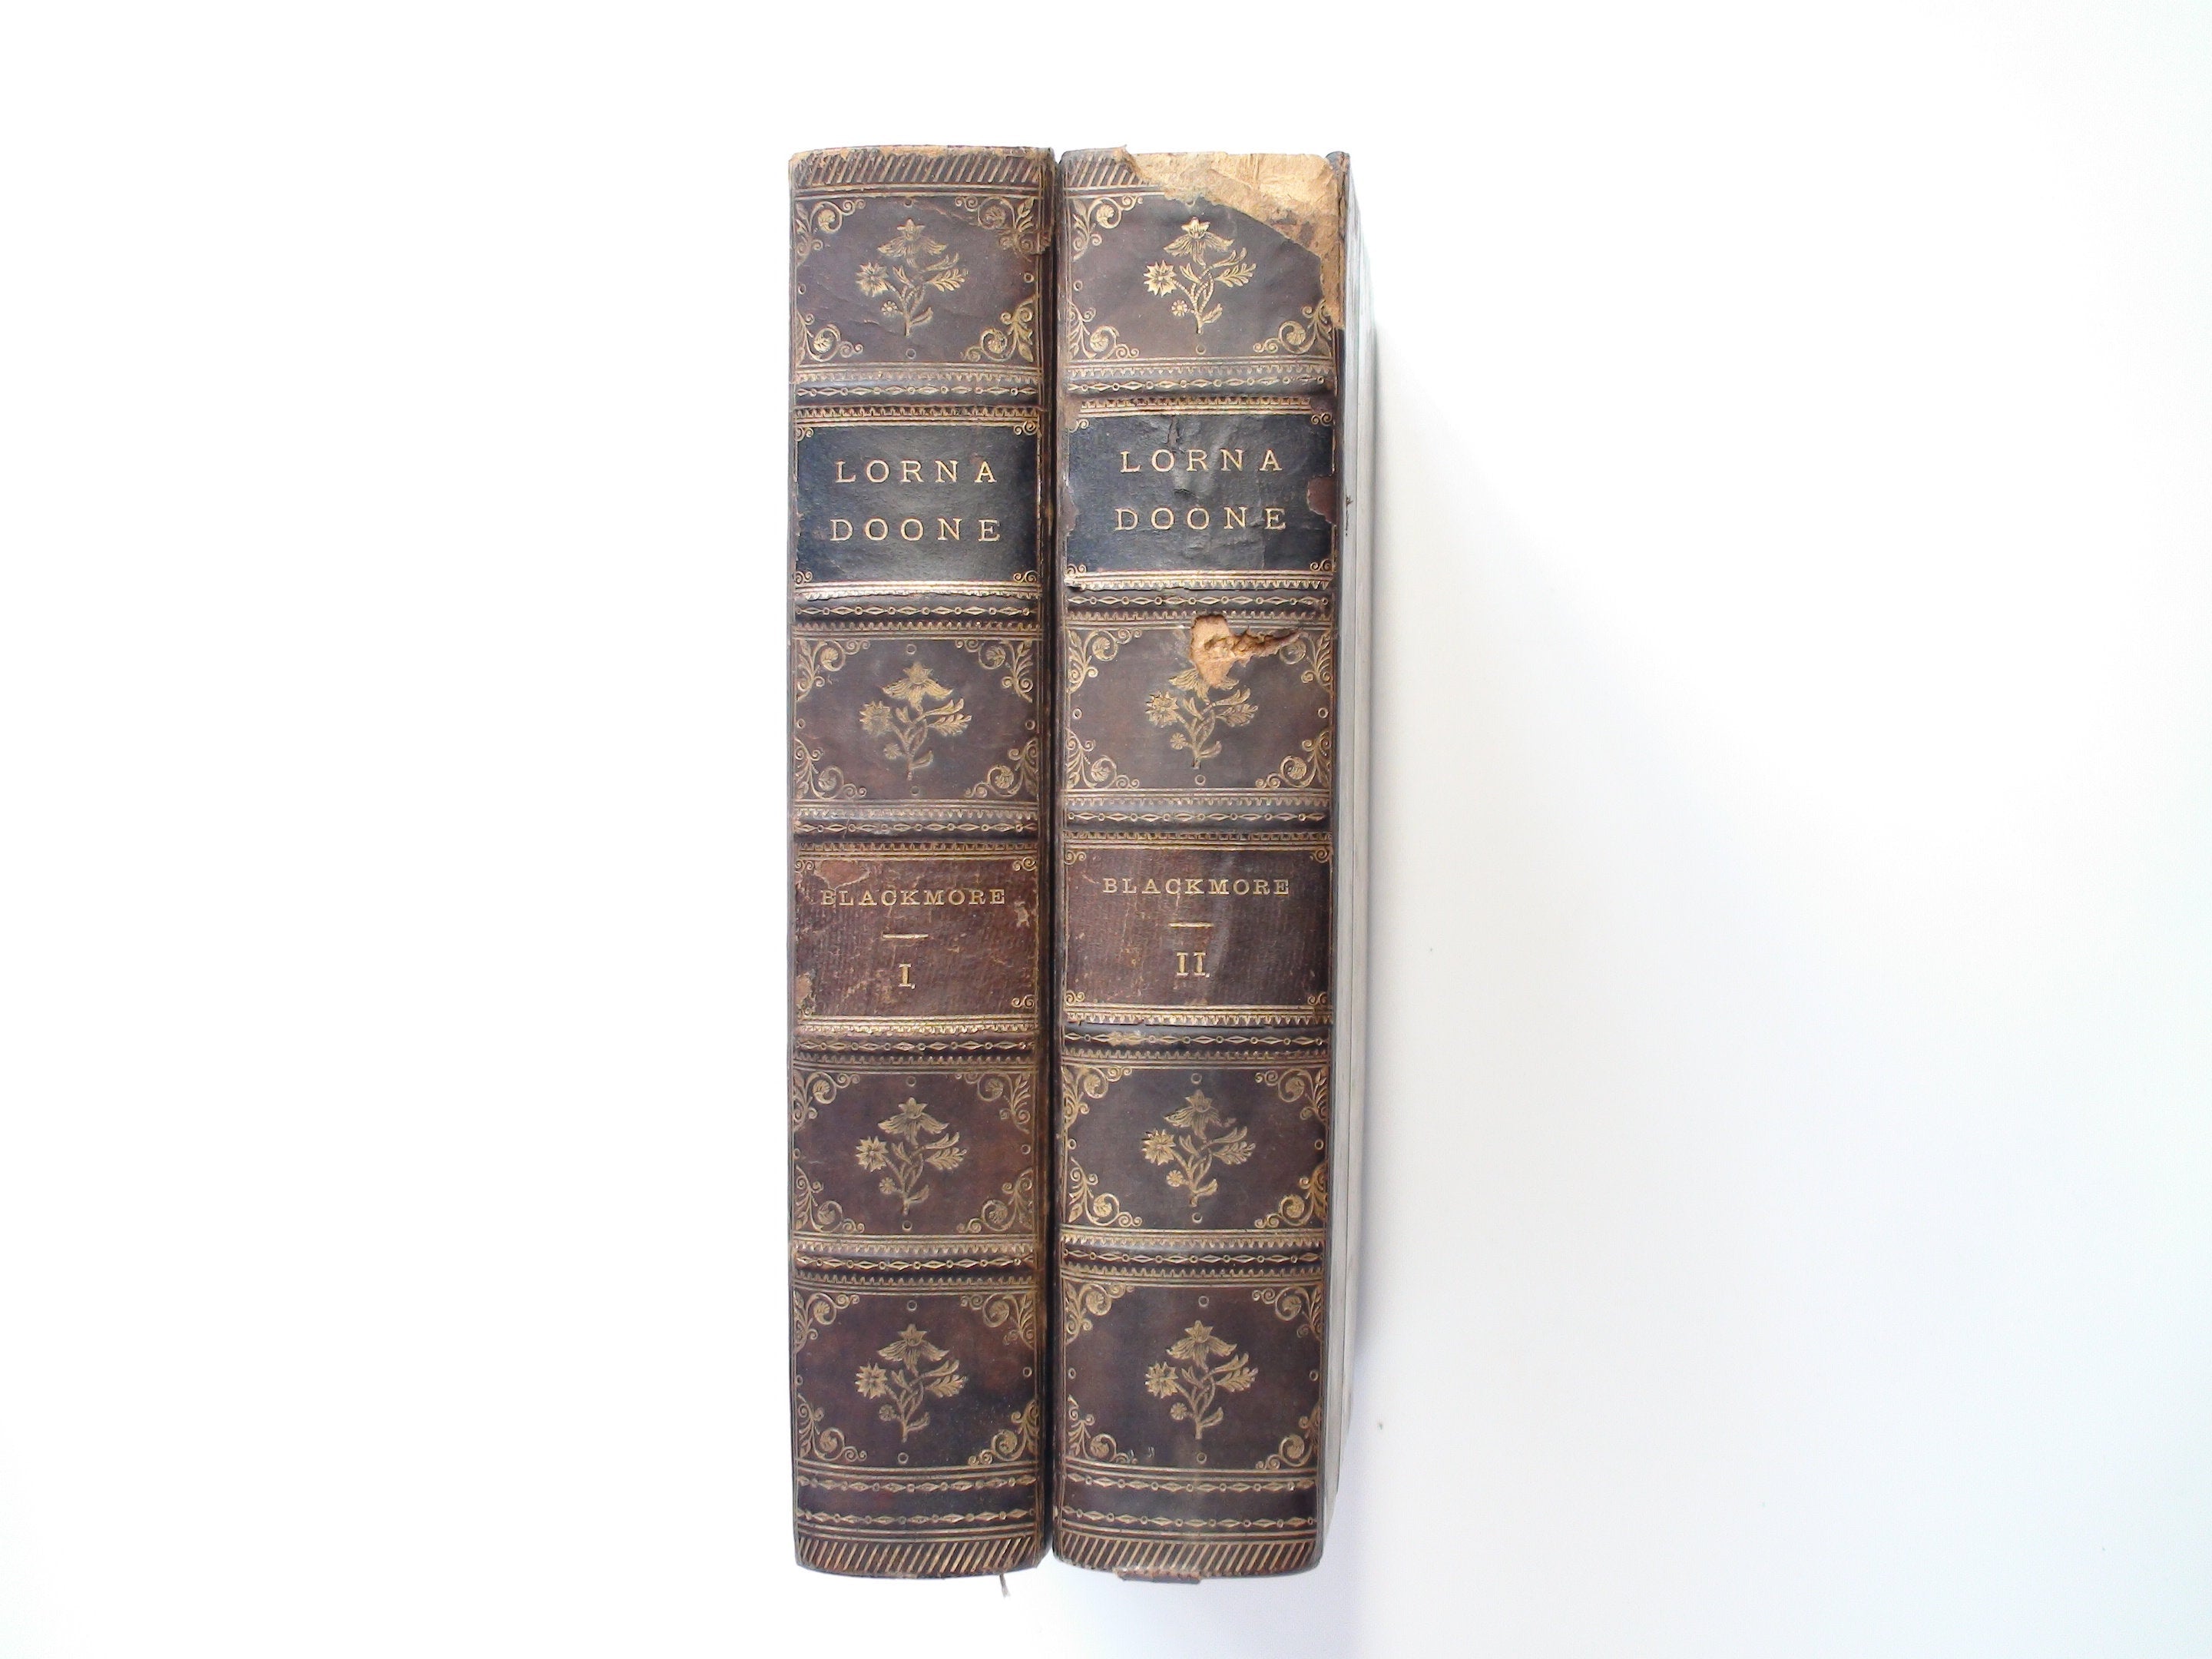 Lorna Doone, by R. D. Blackmore, Illustrated, Leather, Two Vols, 1882